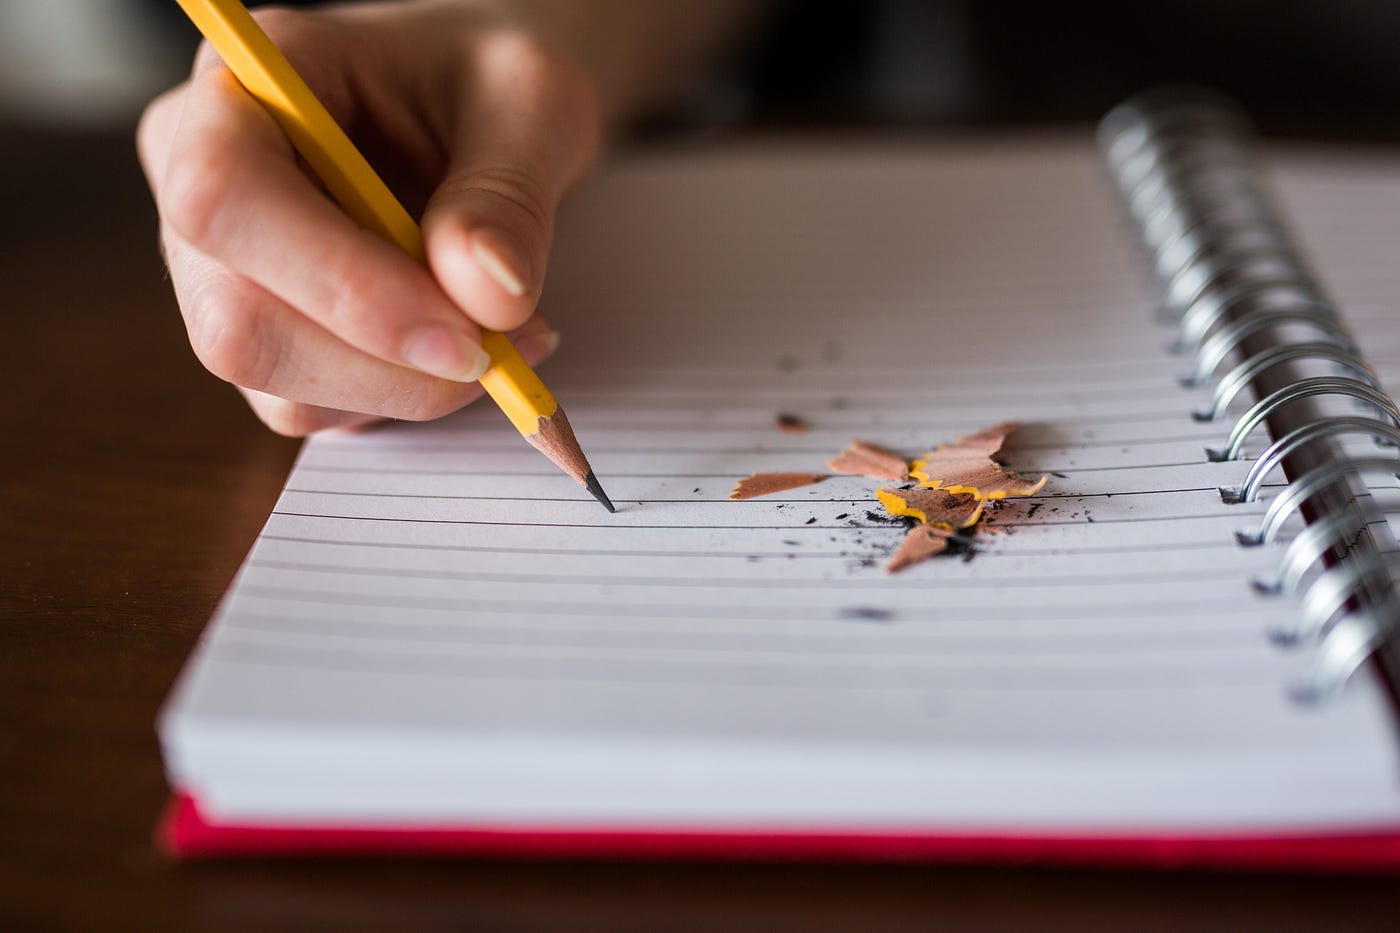 A writer is writing with a yellow pencil in a lined spiral bound notebook, lying on the notebook are pencil shavings.